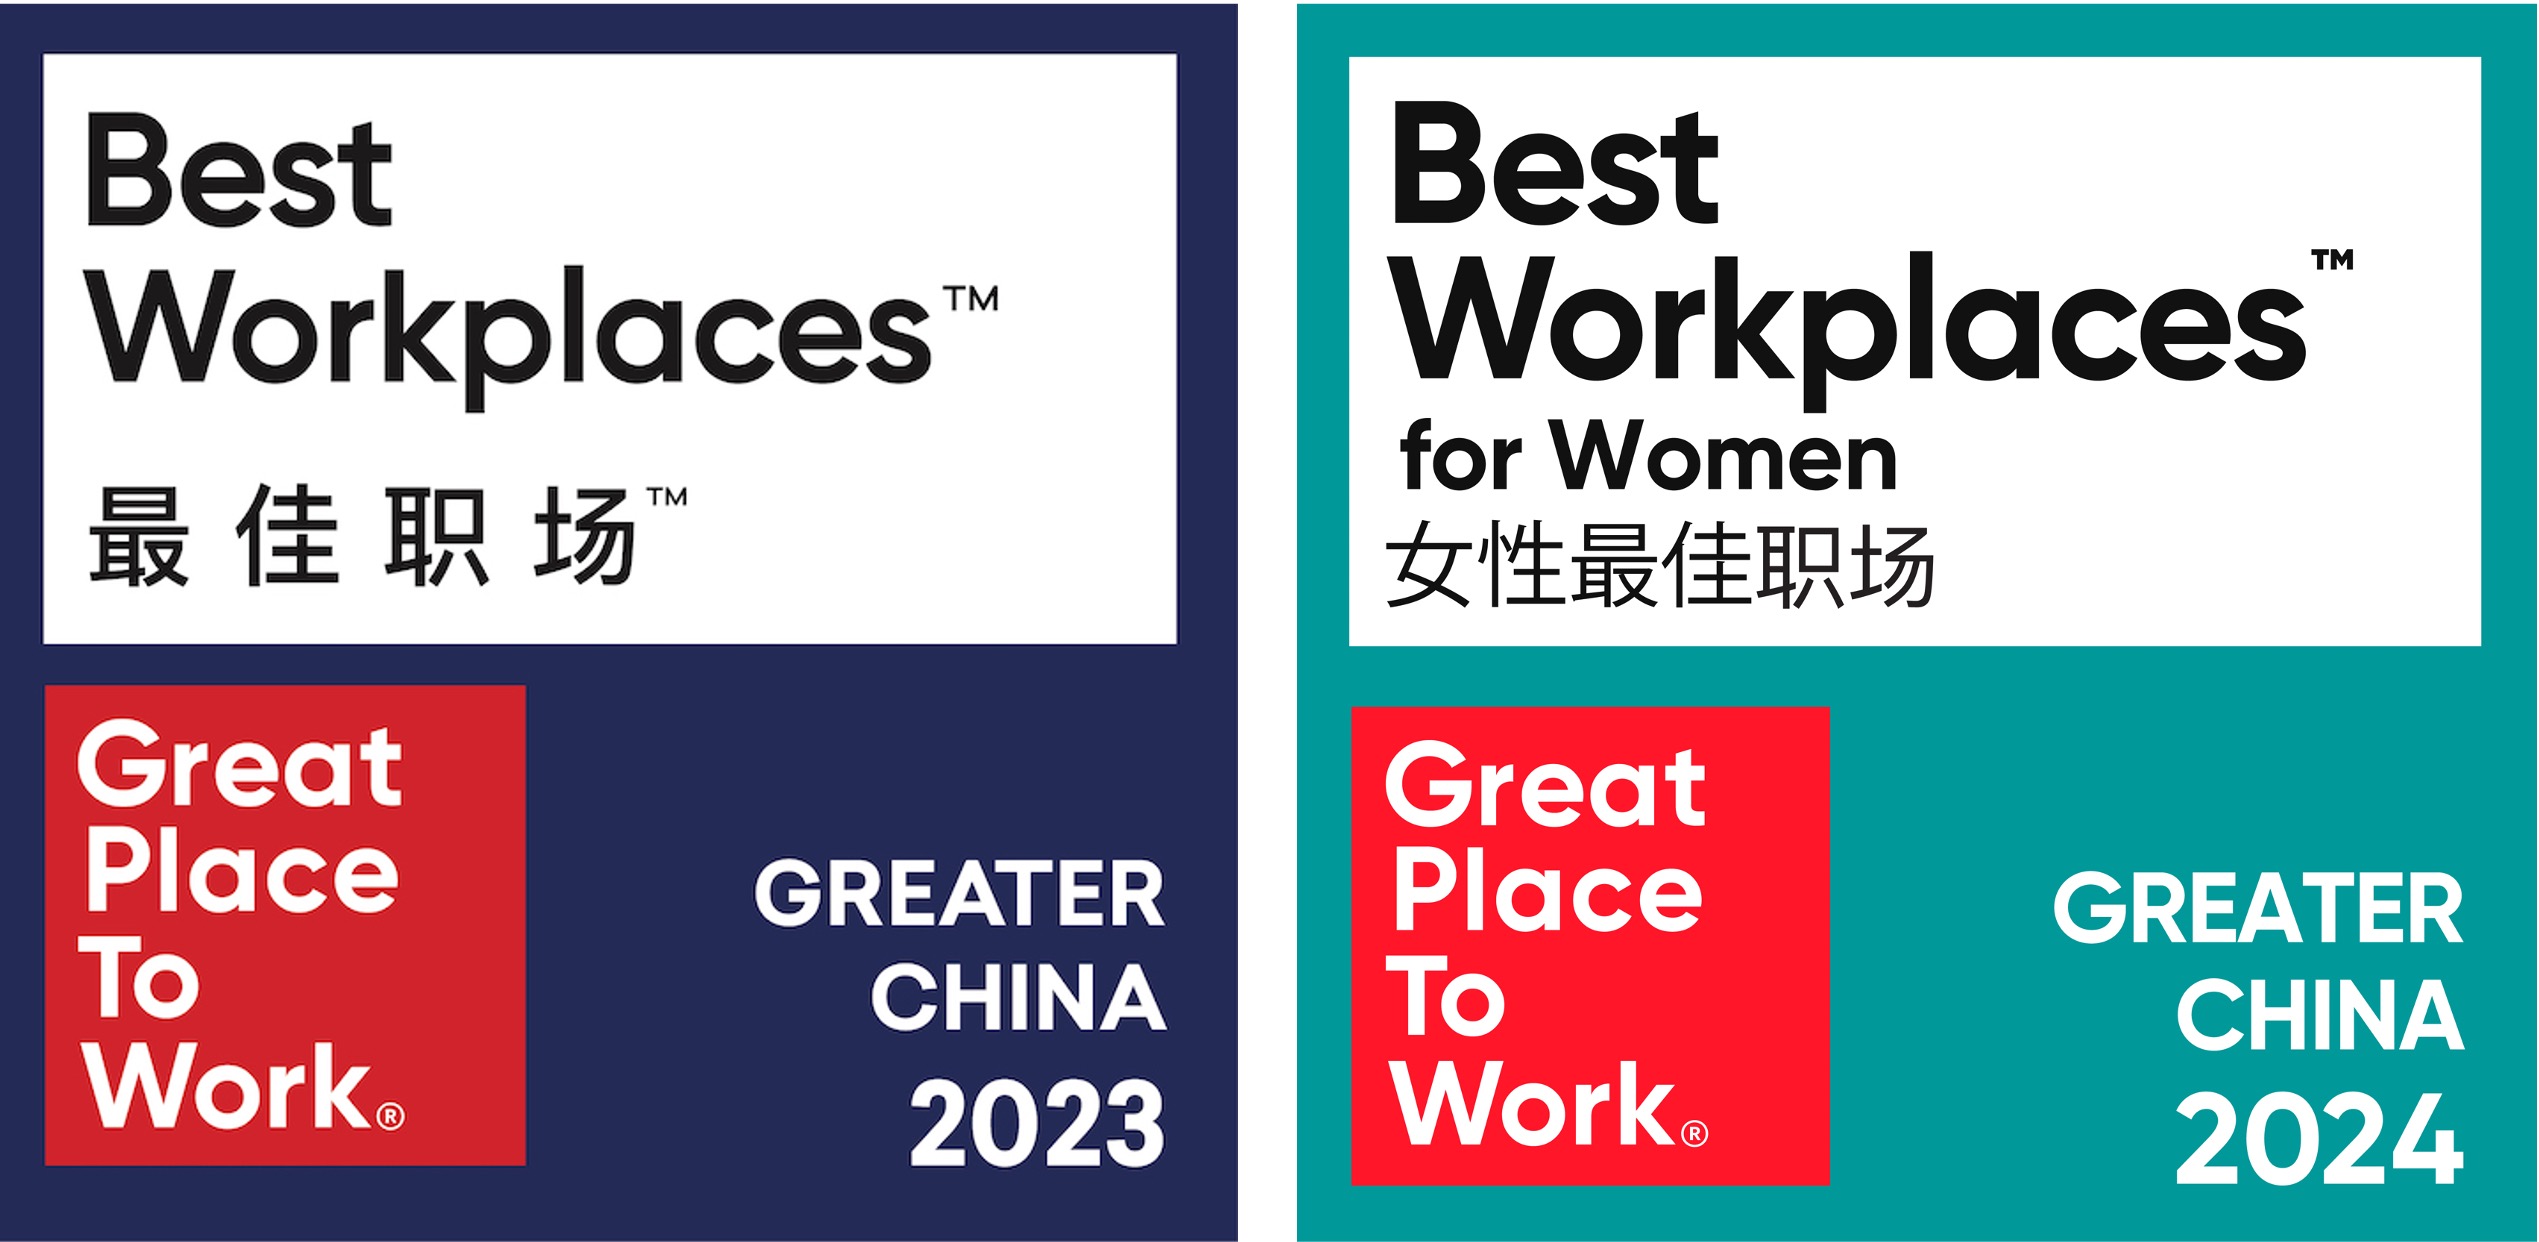 Best Workplaces badges